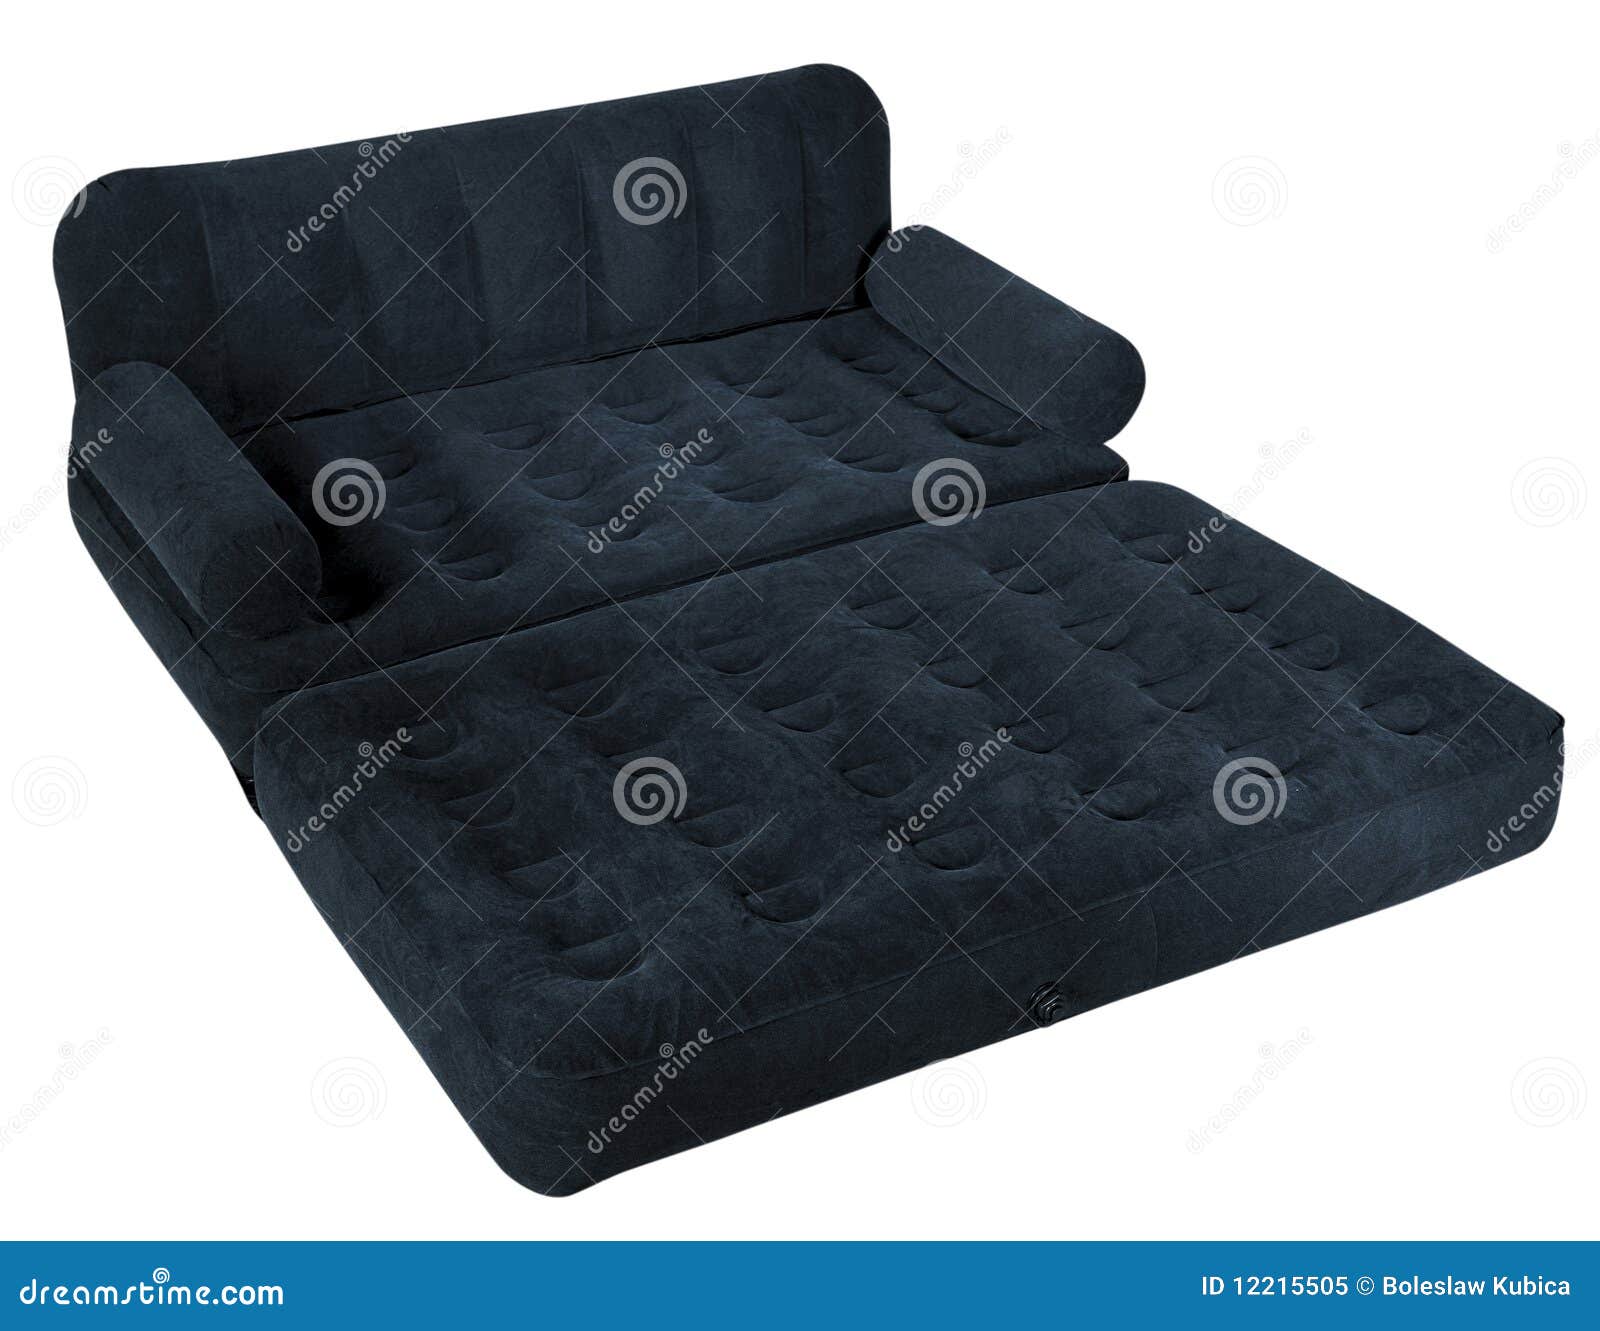 air mattress over couch